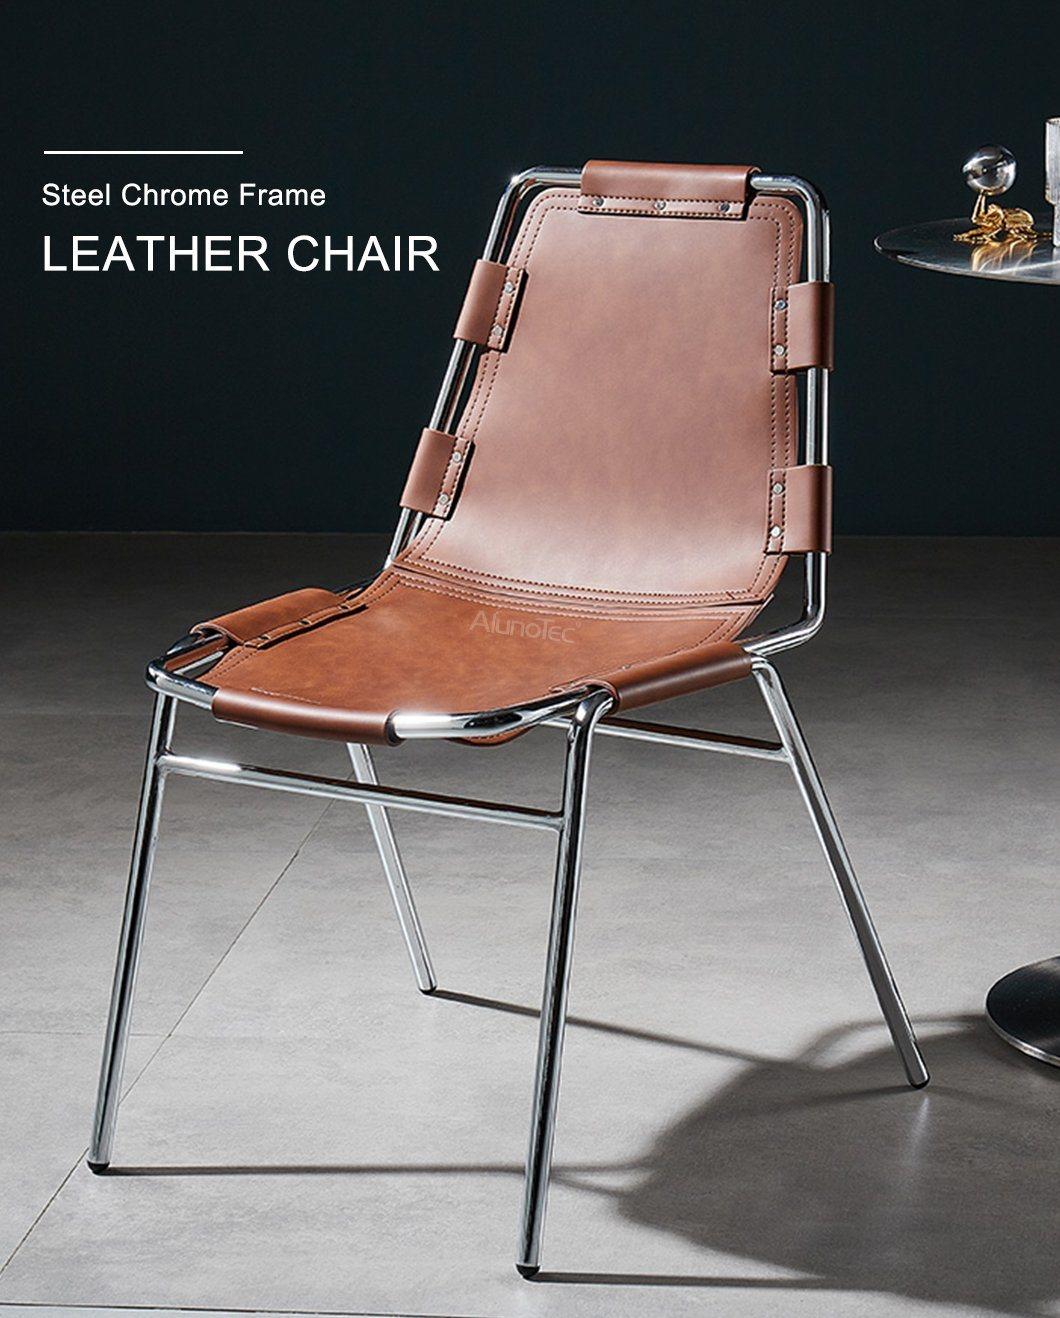 Luxury Design Furniture Leather Dining Chair in Steel Chrome